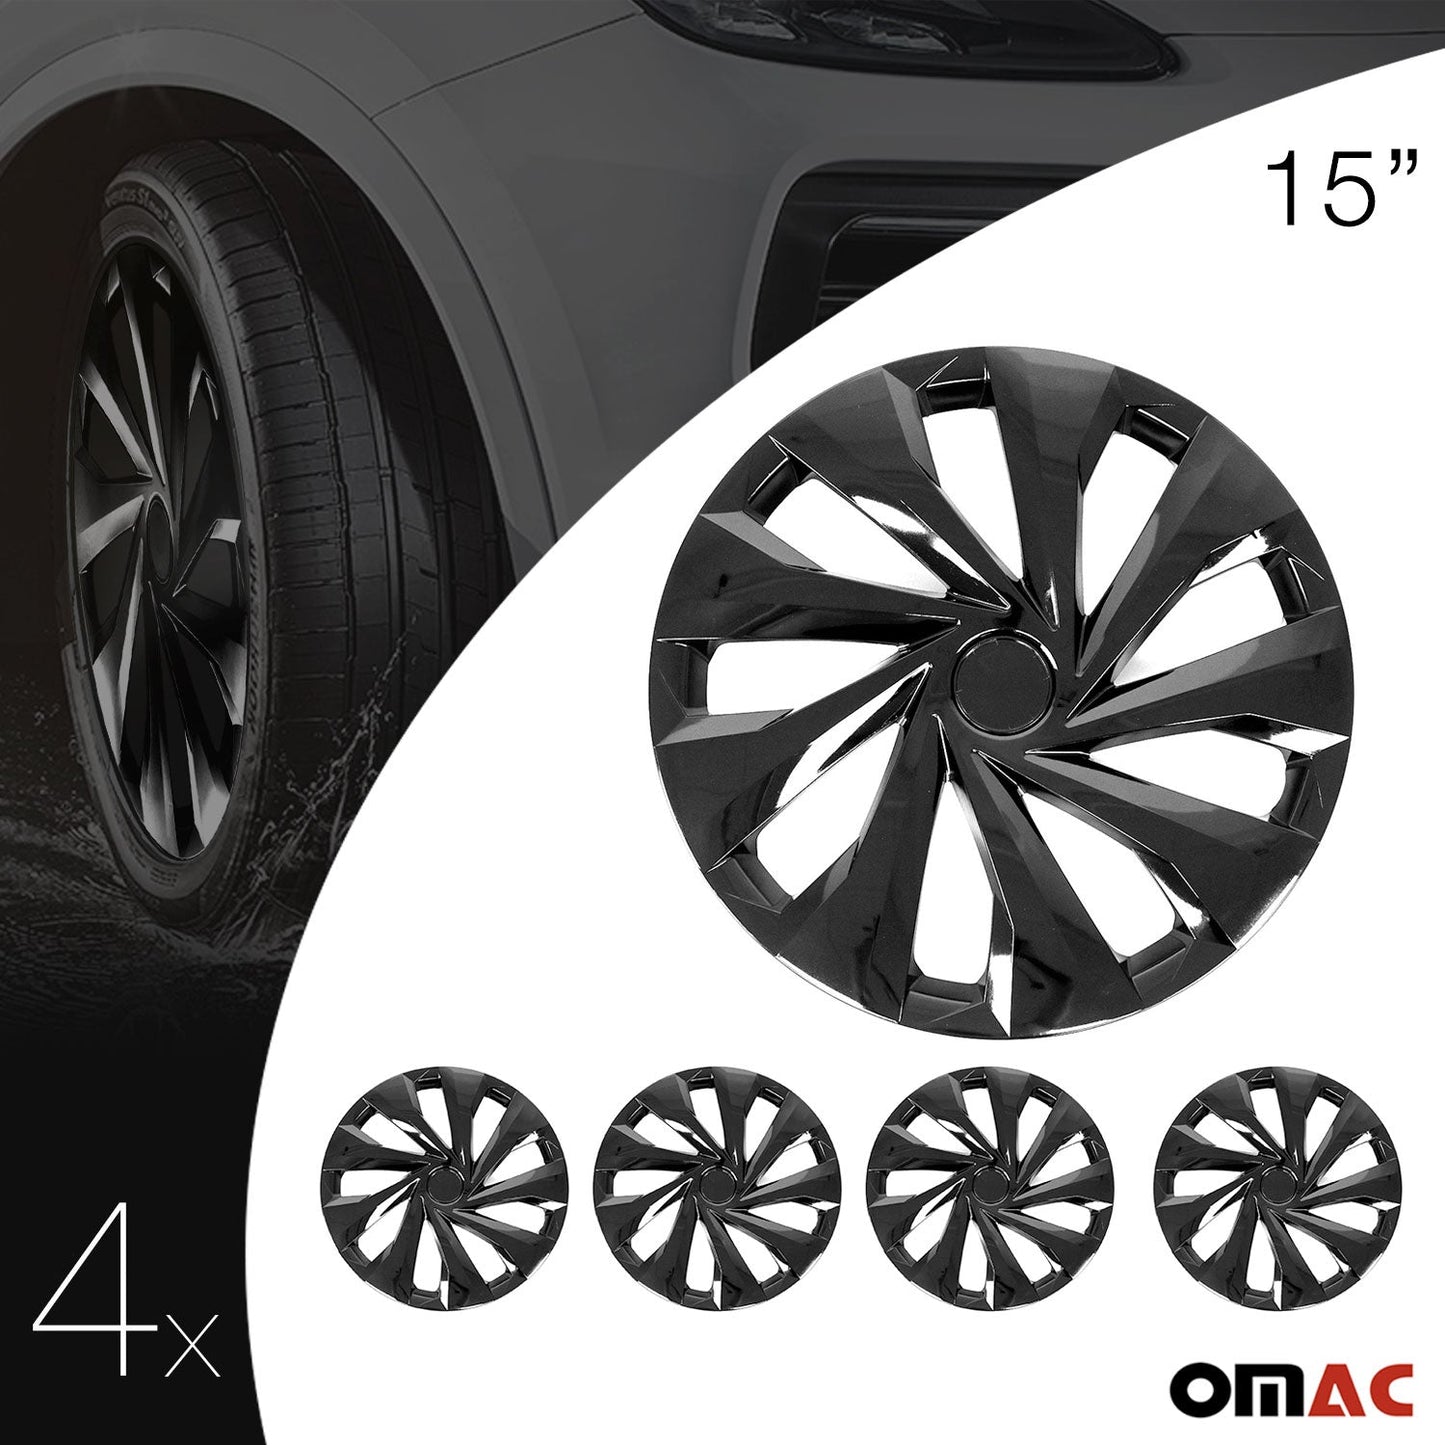 OMAC 15 Inch Wheel Rim Covers Hubcaps for Cadillac Black Gloss G002451